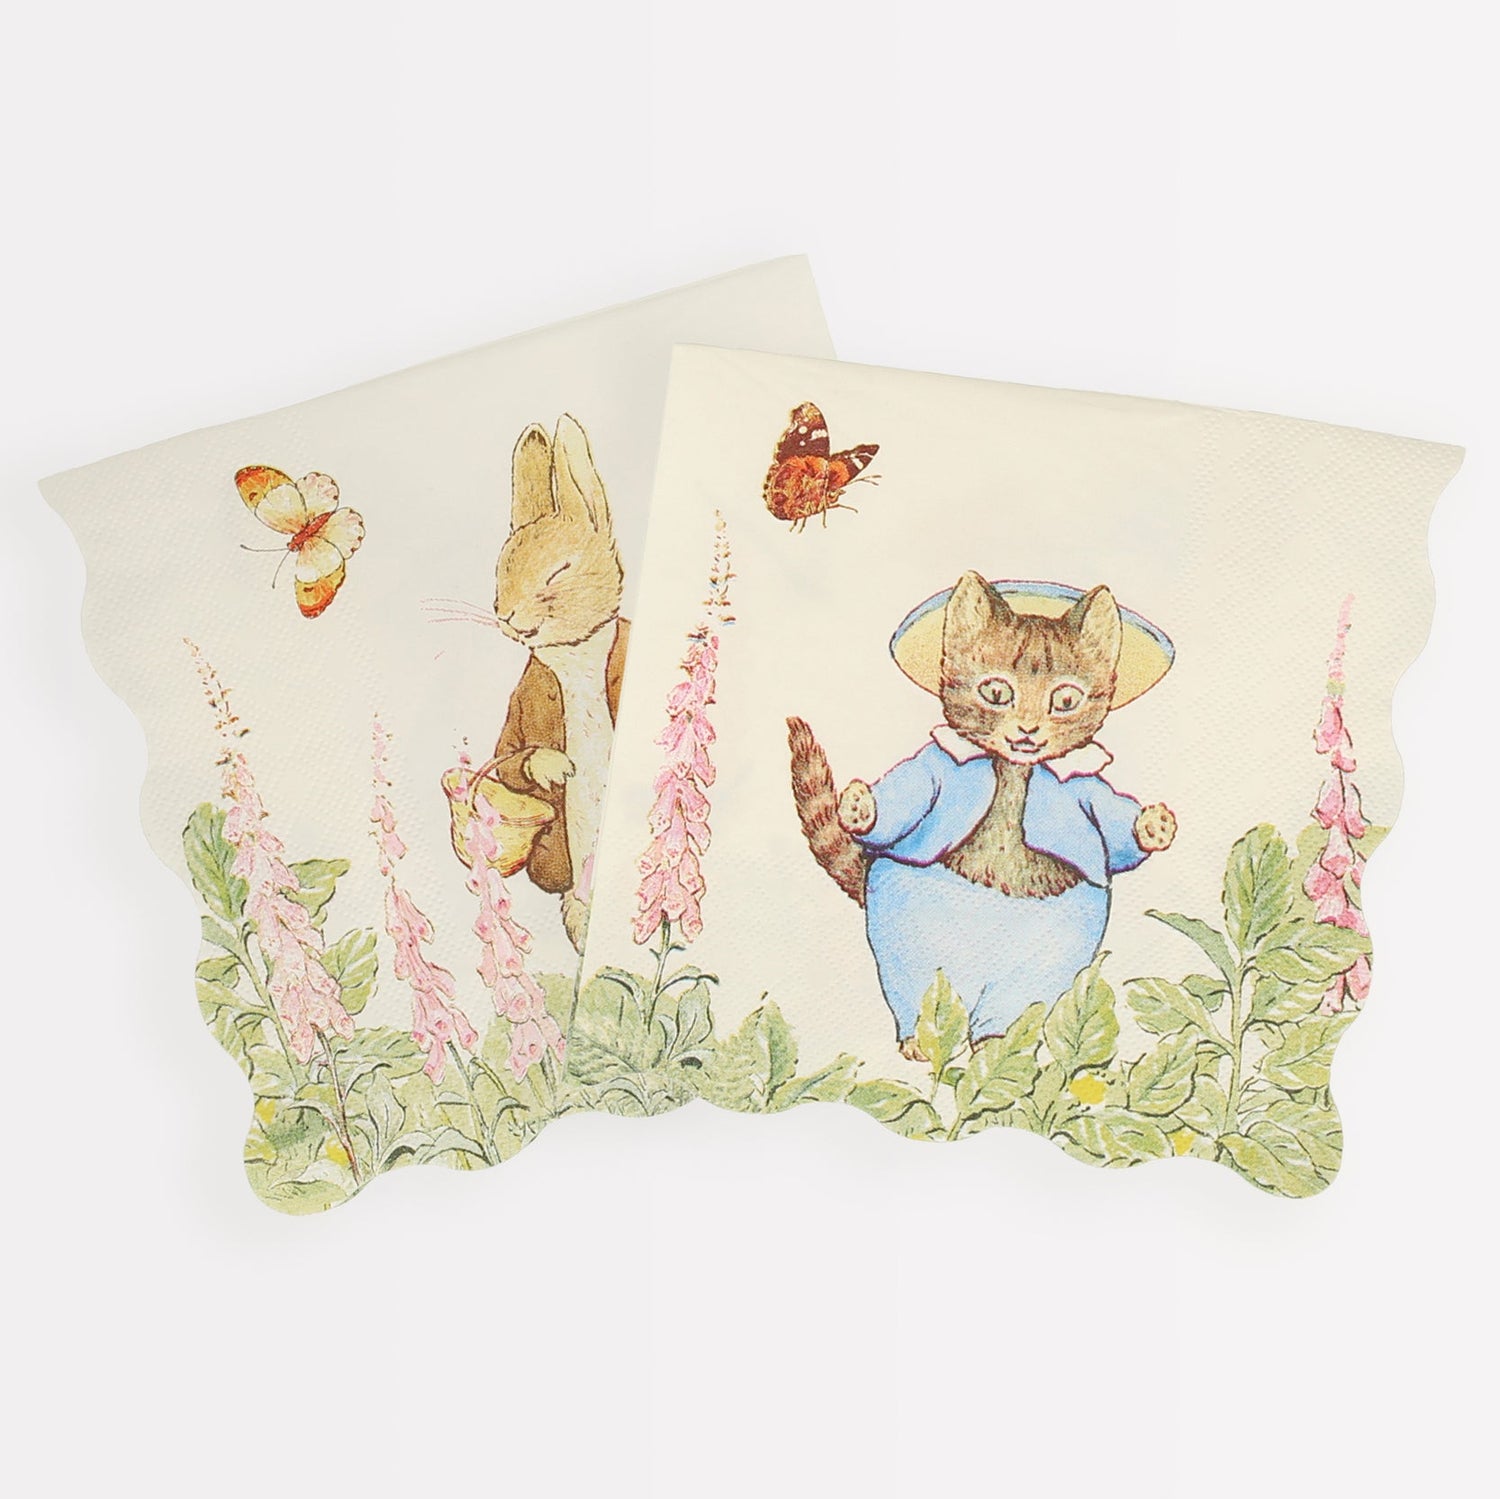 Peter Rabbit in The Garden napkins set of 2 by Meri Meri are the perfect addition to any party table.